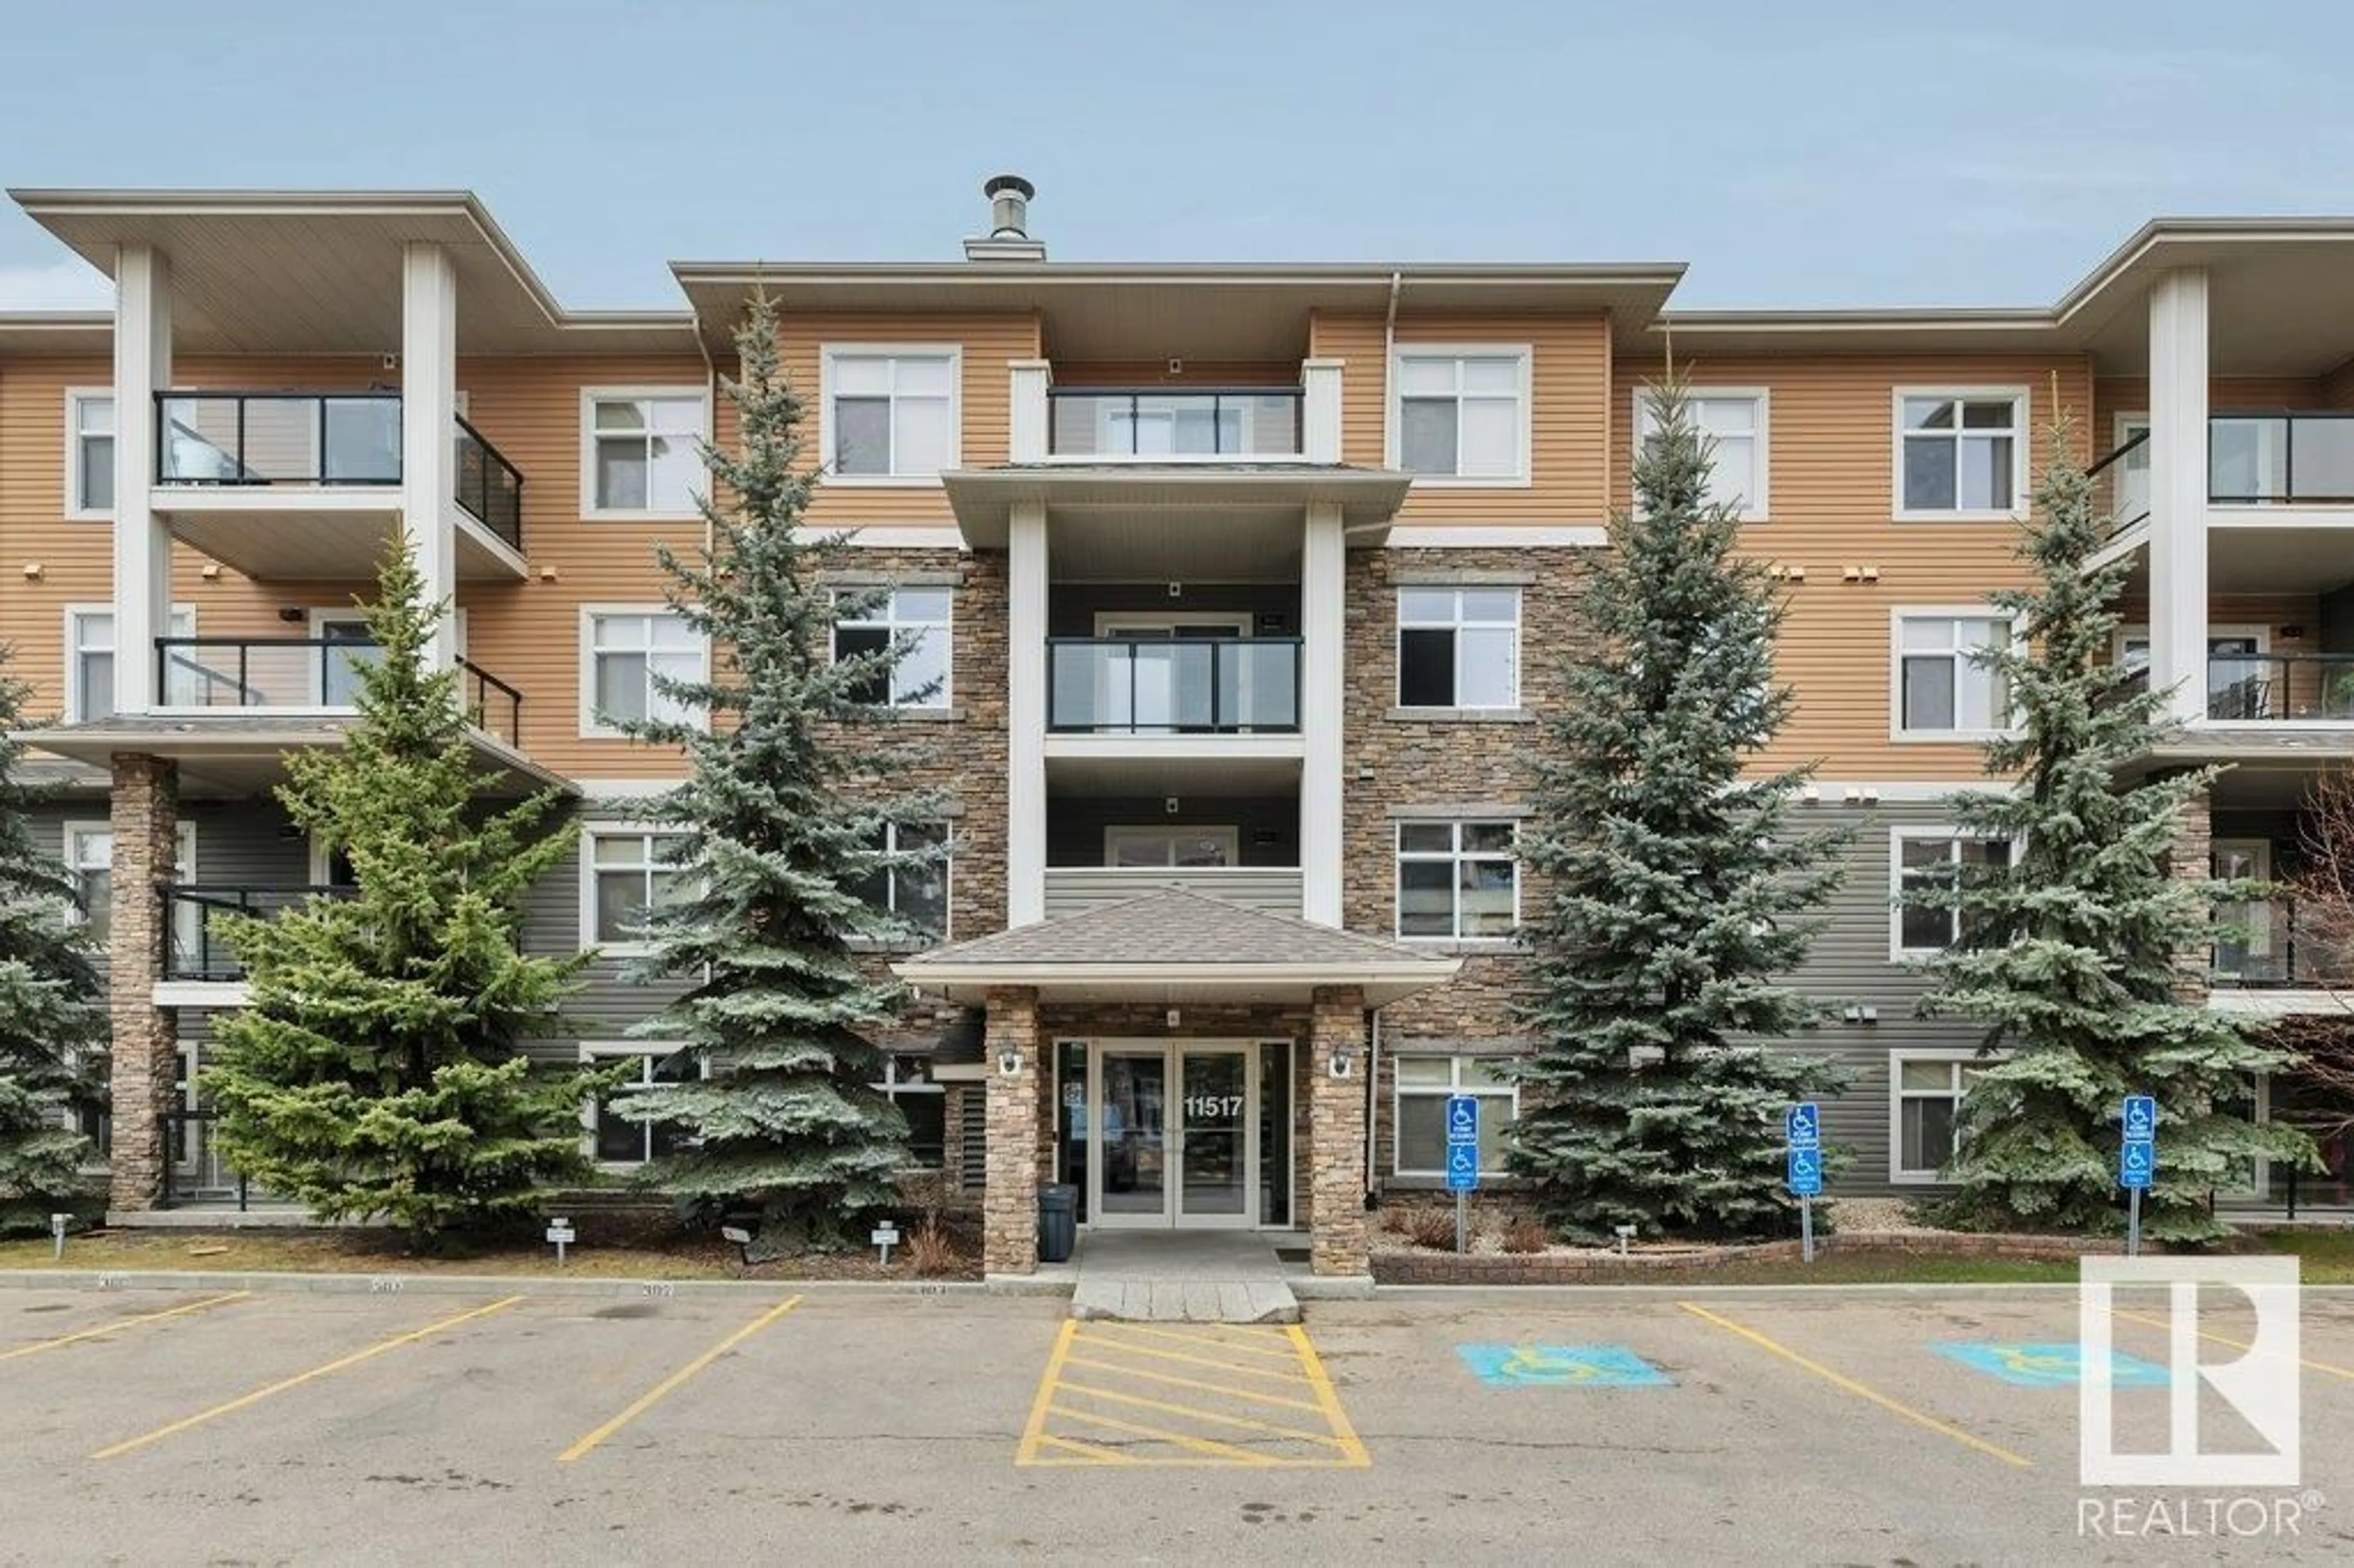 A pic from exterior of the house or condo for #357 11517 ELLERSLIE RD SW, Edmonton Alberta T6W2A9